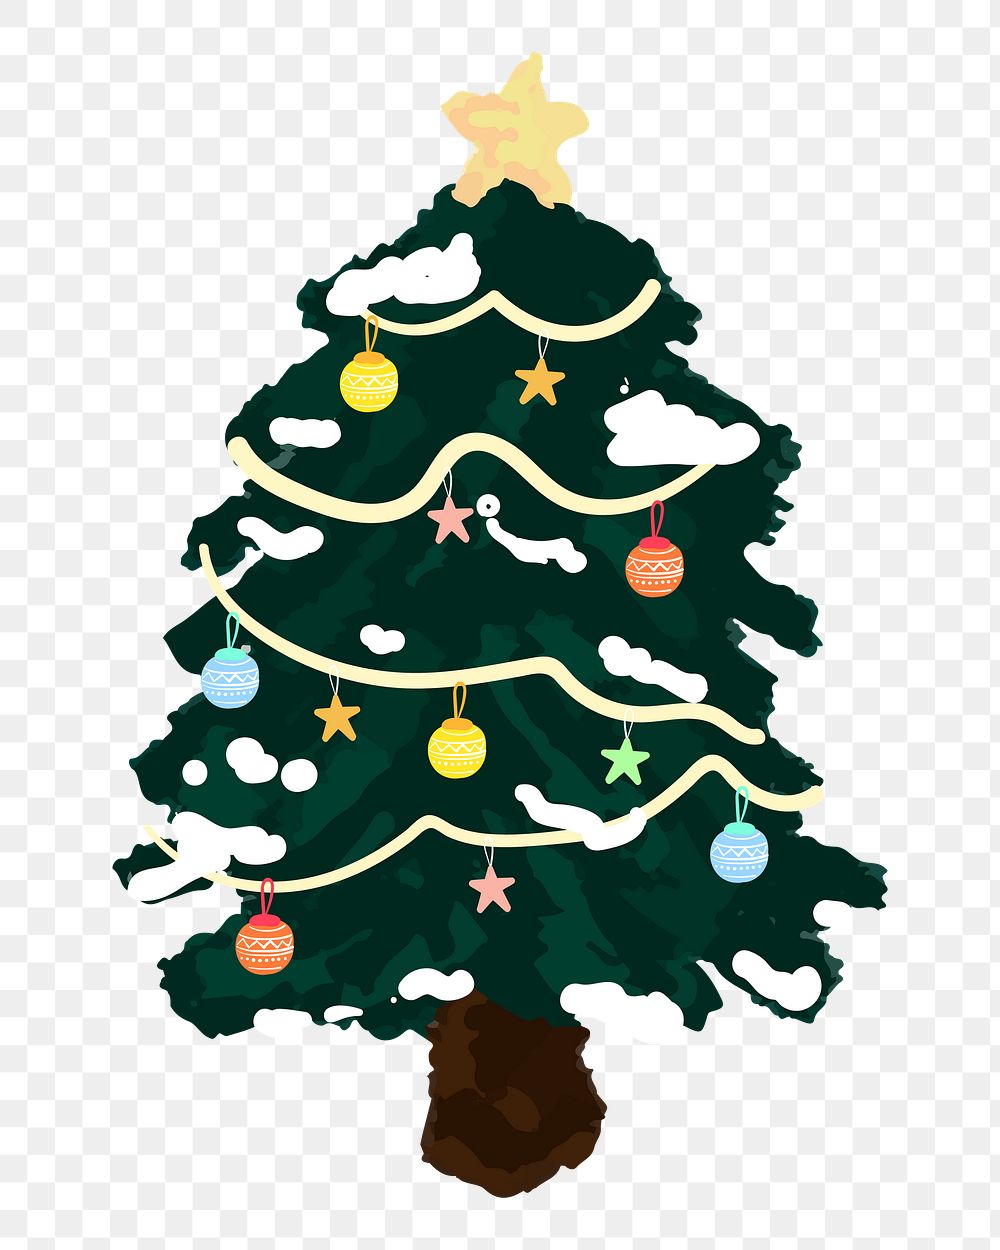 Png cute Christmas tree element, transparent background